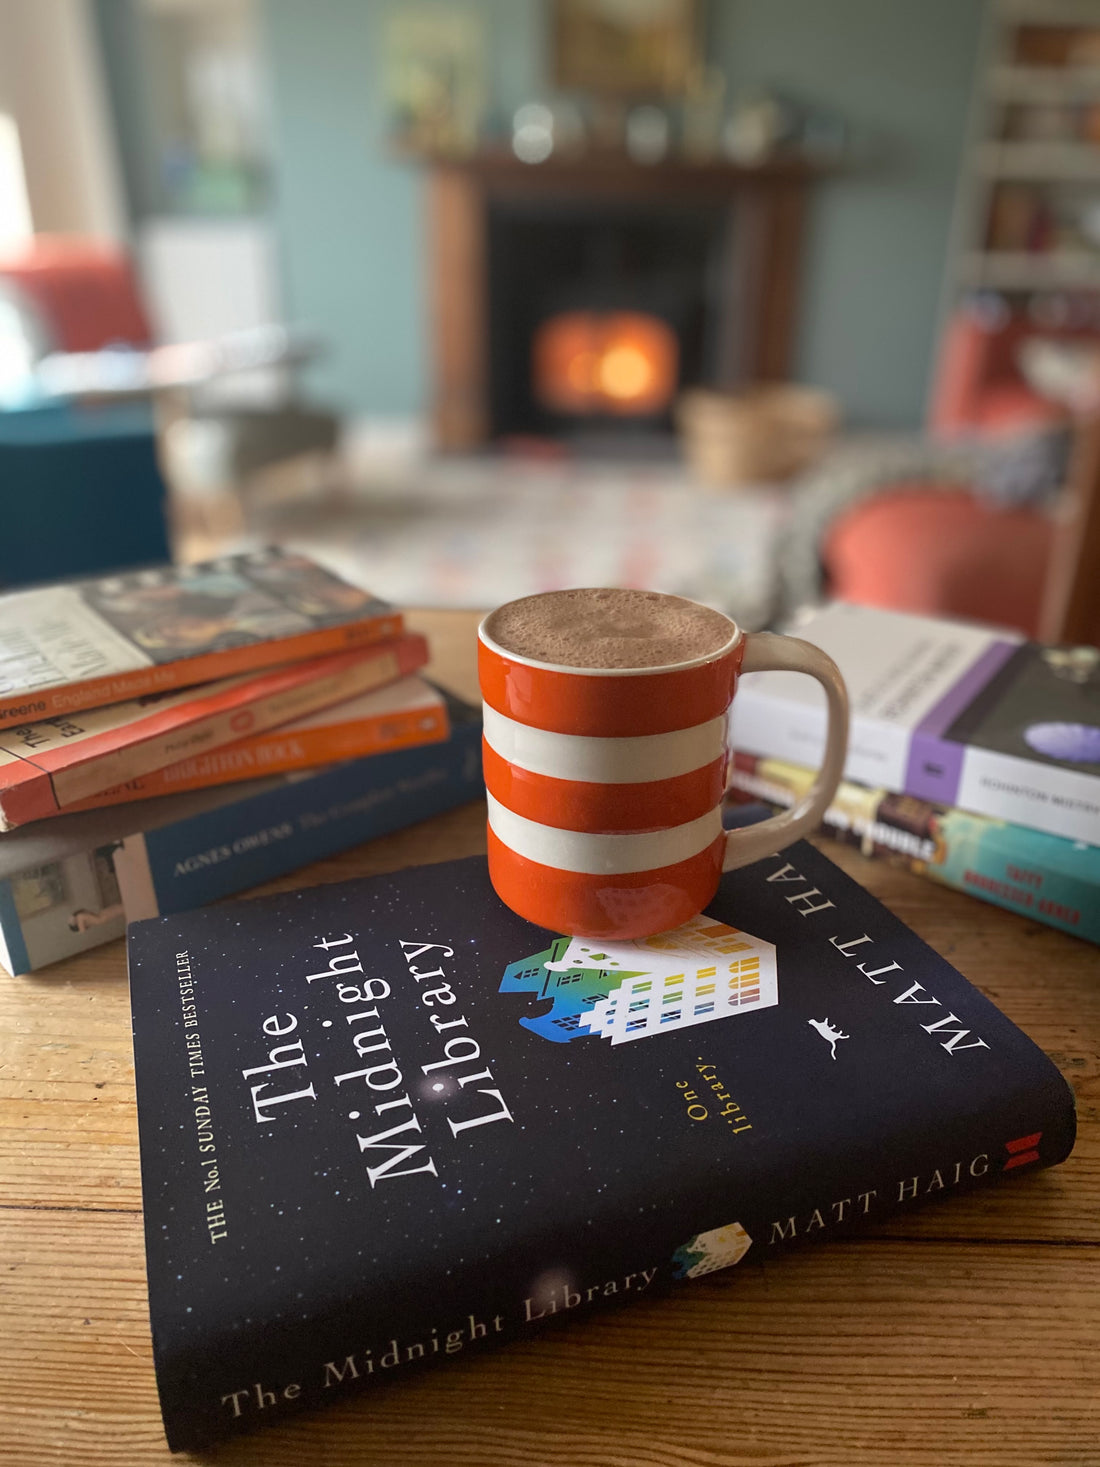 Favourite fireside reads (with a mug of hot chocolate)